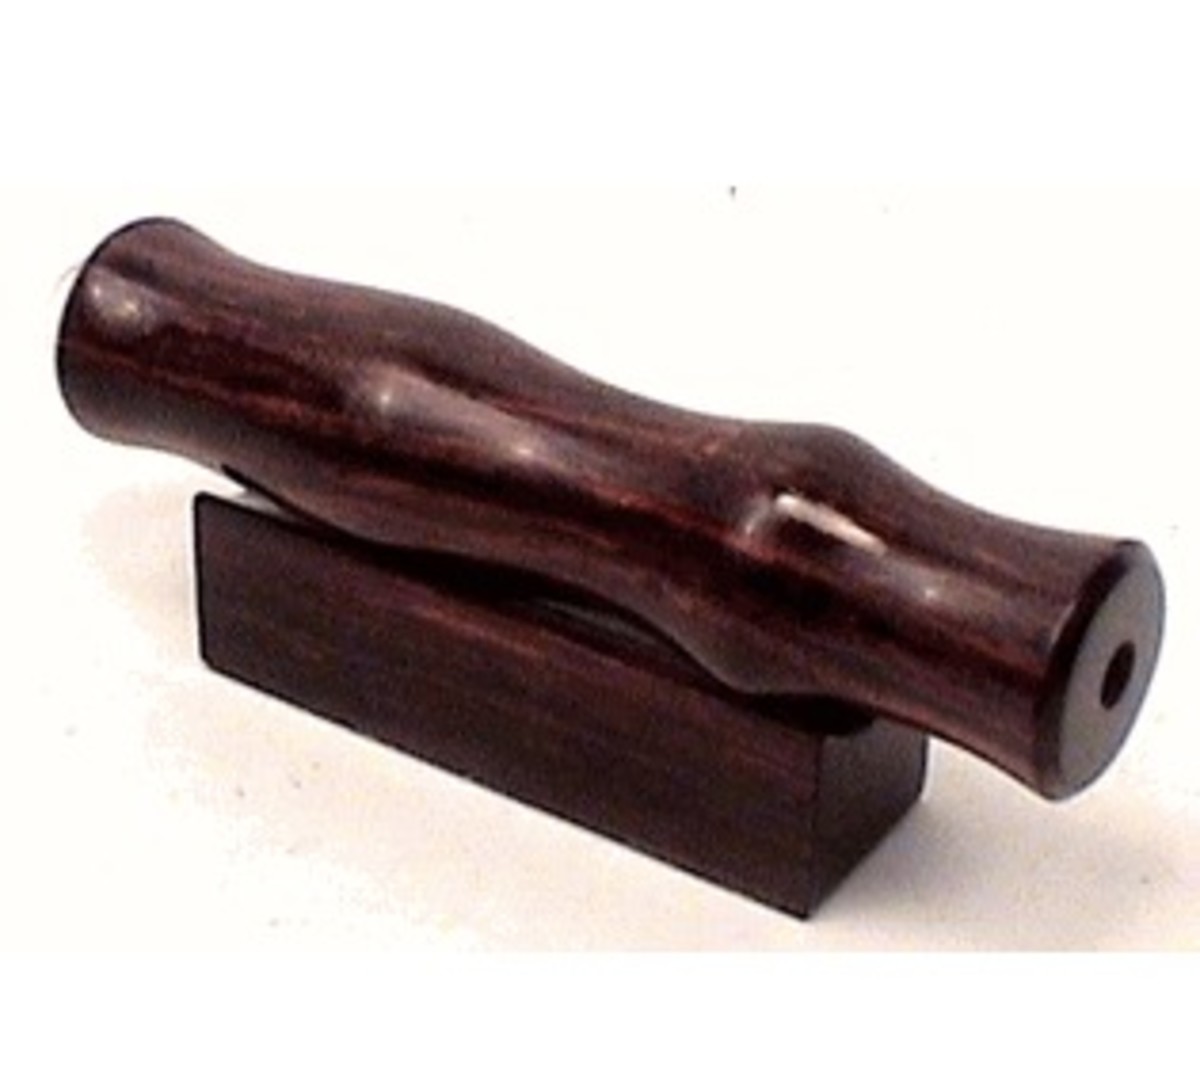 2013 Holiday Gift Guide - Hard to Shop for People - Rosewood Teleidoscipe - TodaysMama.com